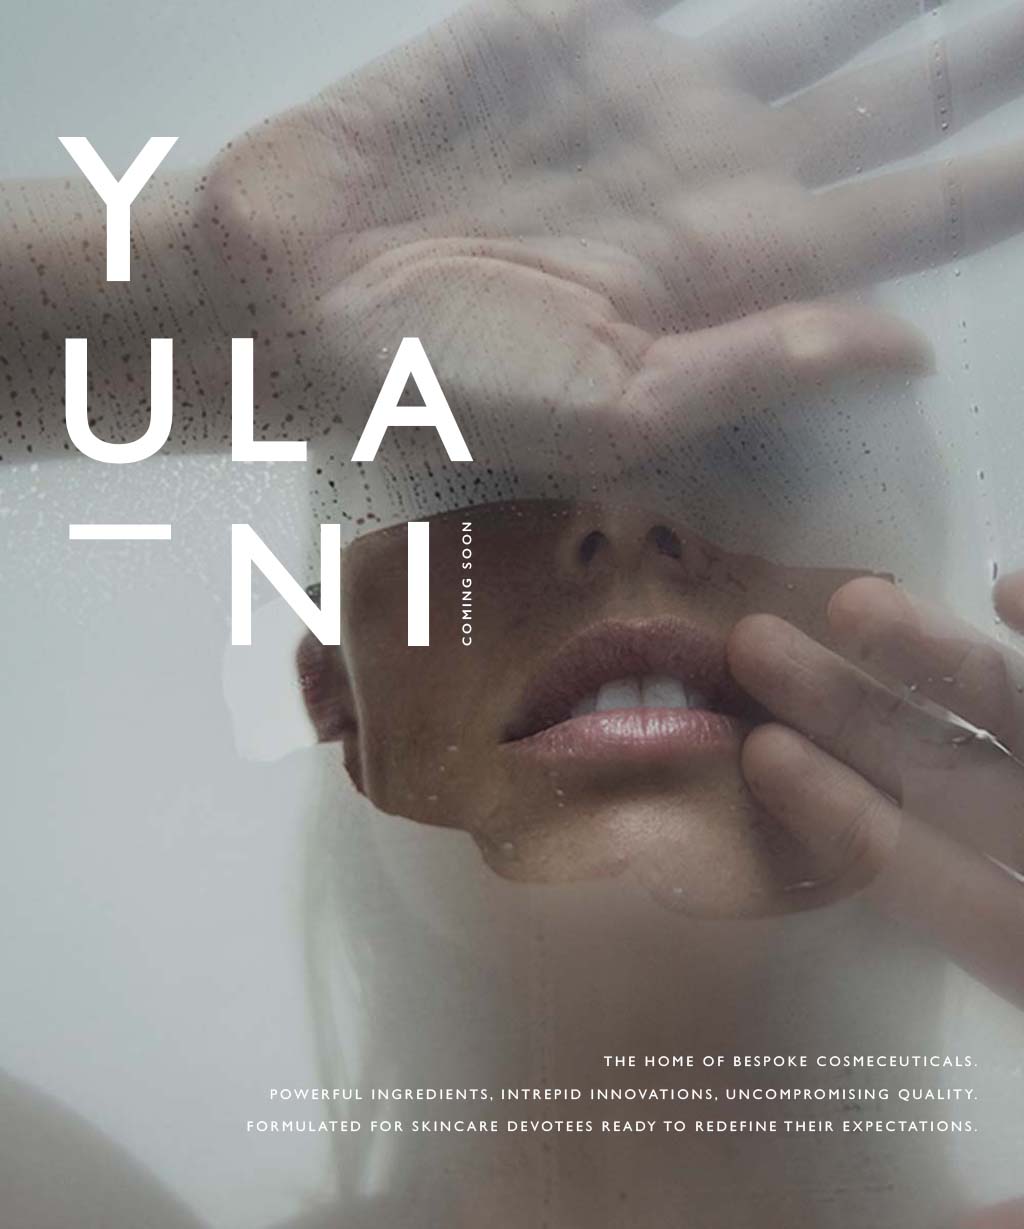 Yulani coming soon home page. Text reads, the home of bespoke cosmeceuticals. Powerful ingredients, intrepid innovation, uncompromising quality. Formulated for skincare devotees ready to redefine their expectation. Image depicts talent looking into fogged